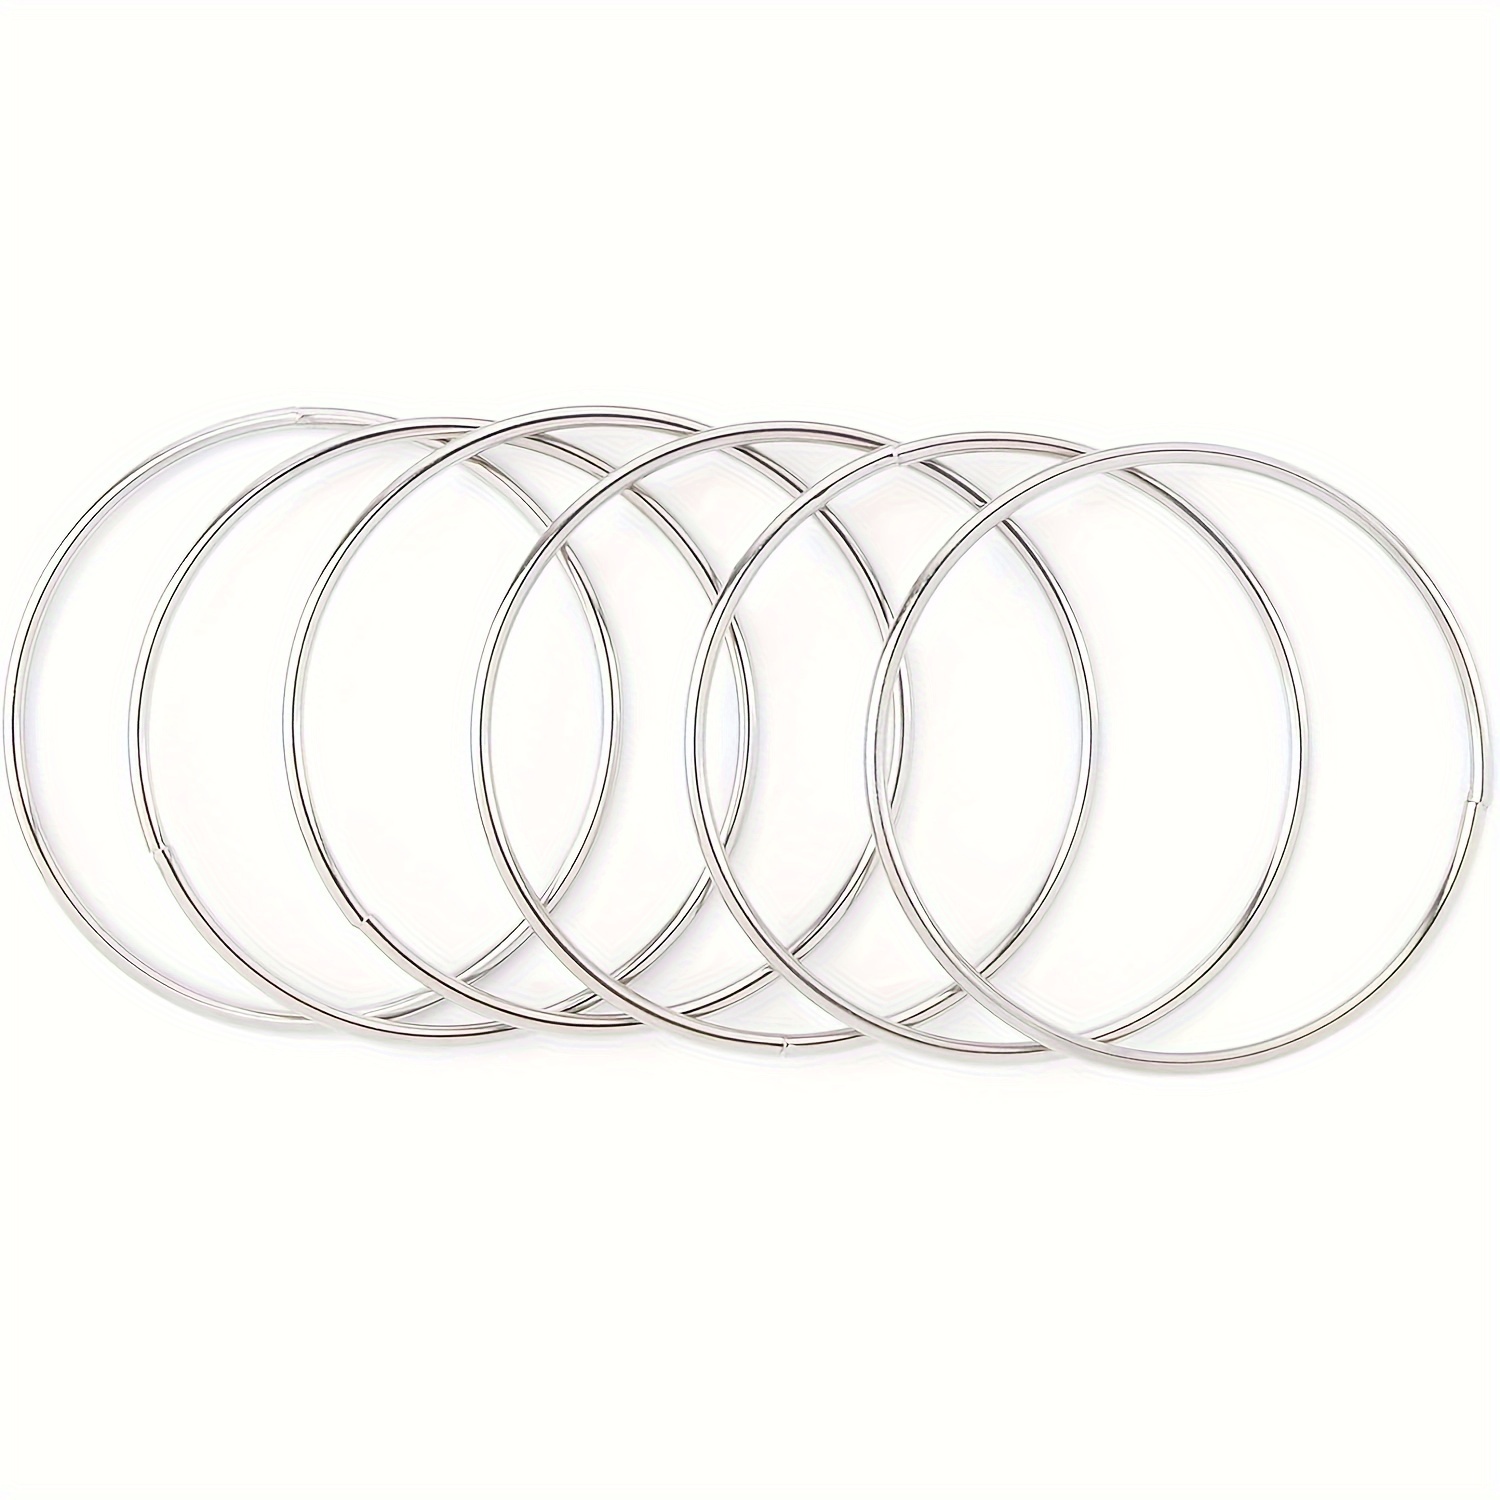 Metal Rings for Crafts 1 inch Small Metal Ring 1 inch 30Pcs Stainless Steel  Welded 4mm Thick Heavy Duty Metal O Ring Macrame Rings for DIY Hardware